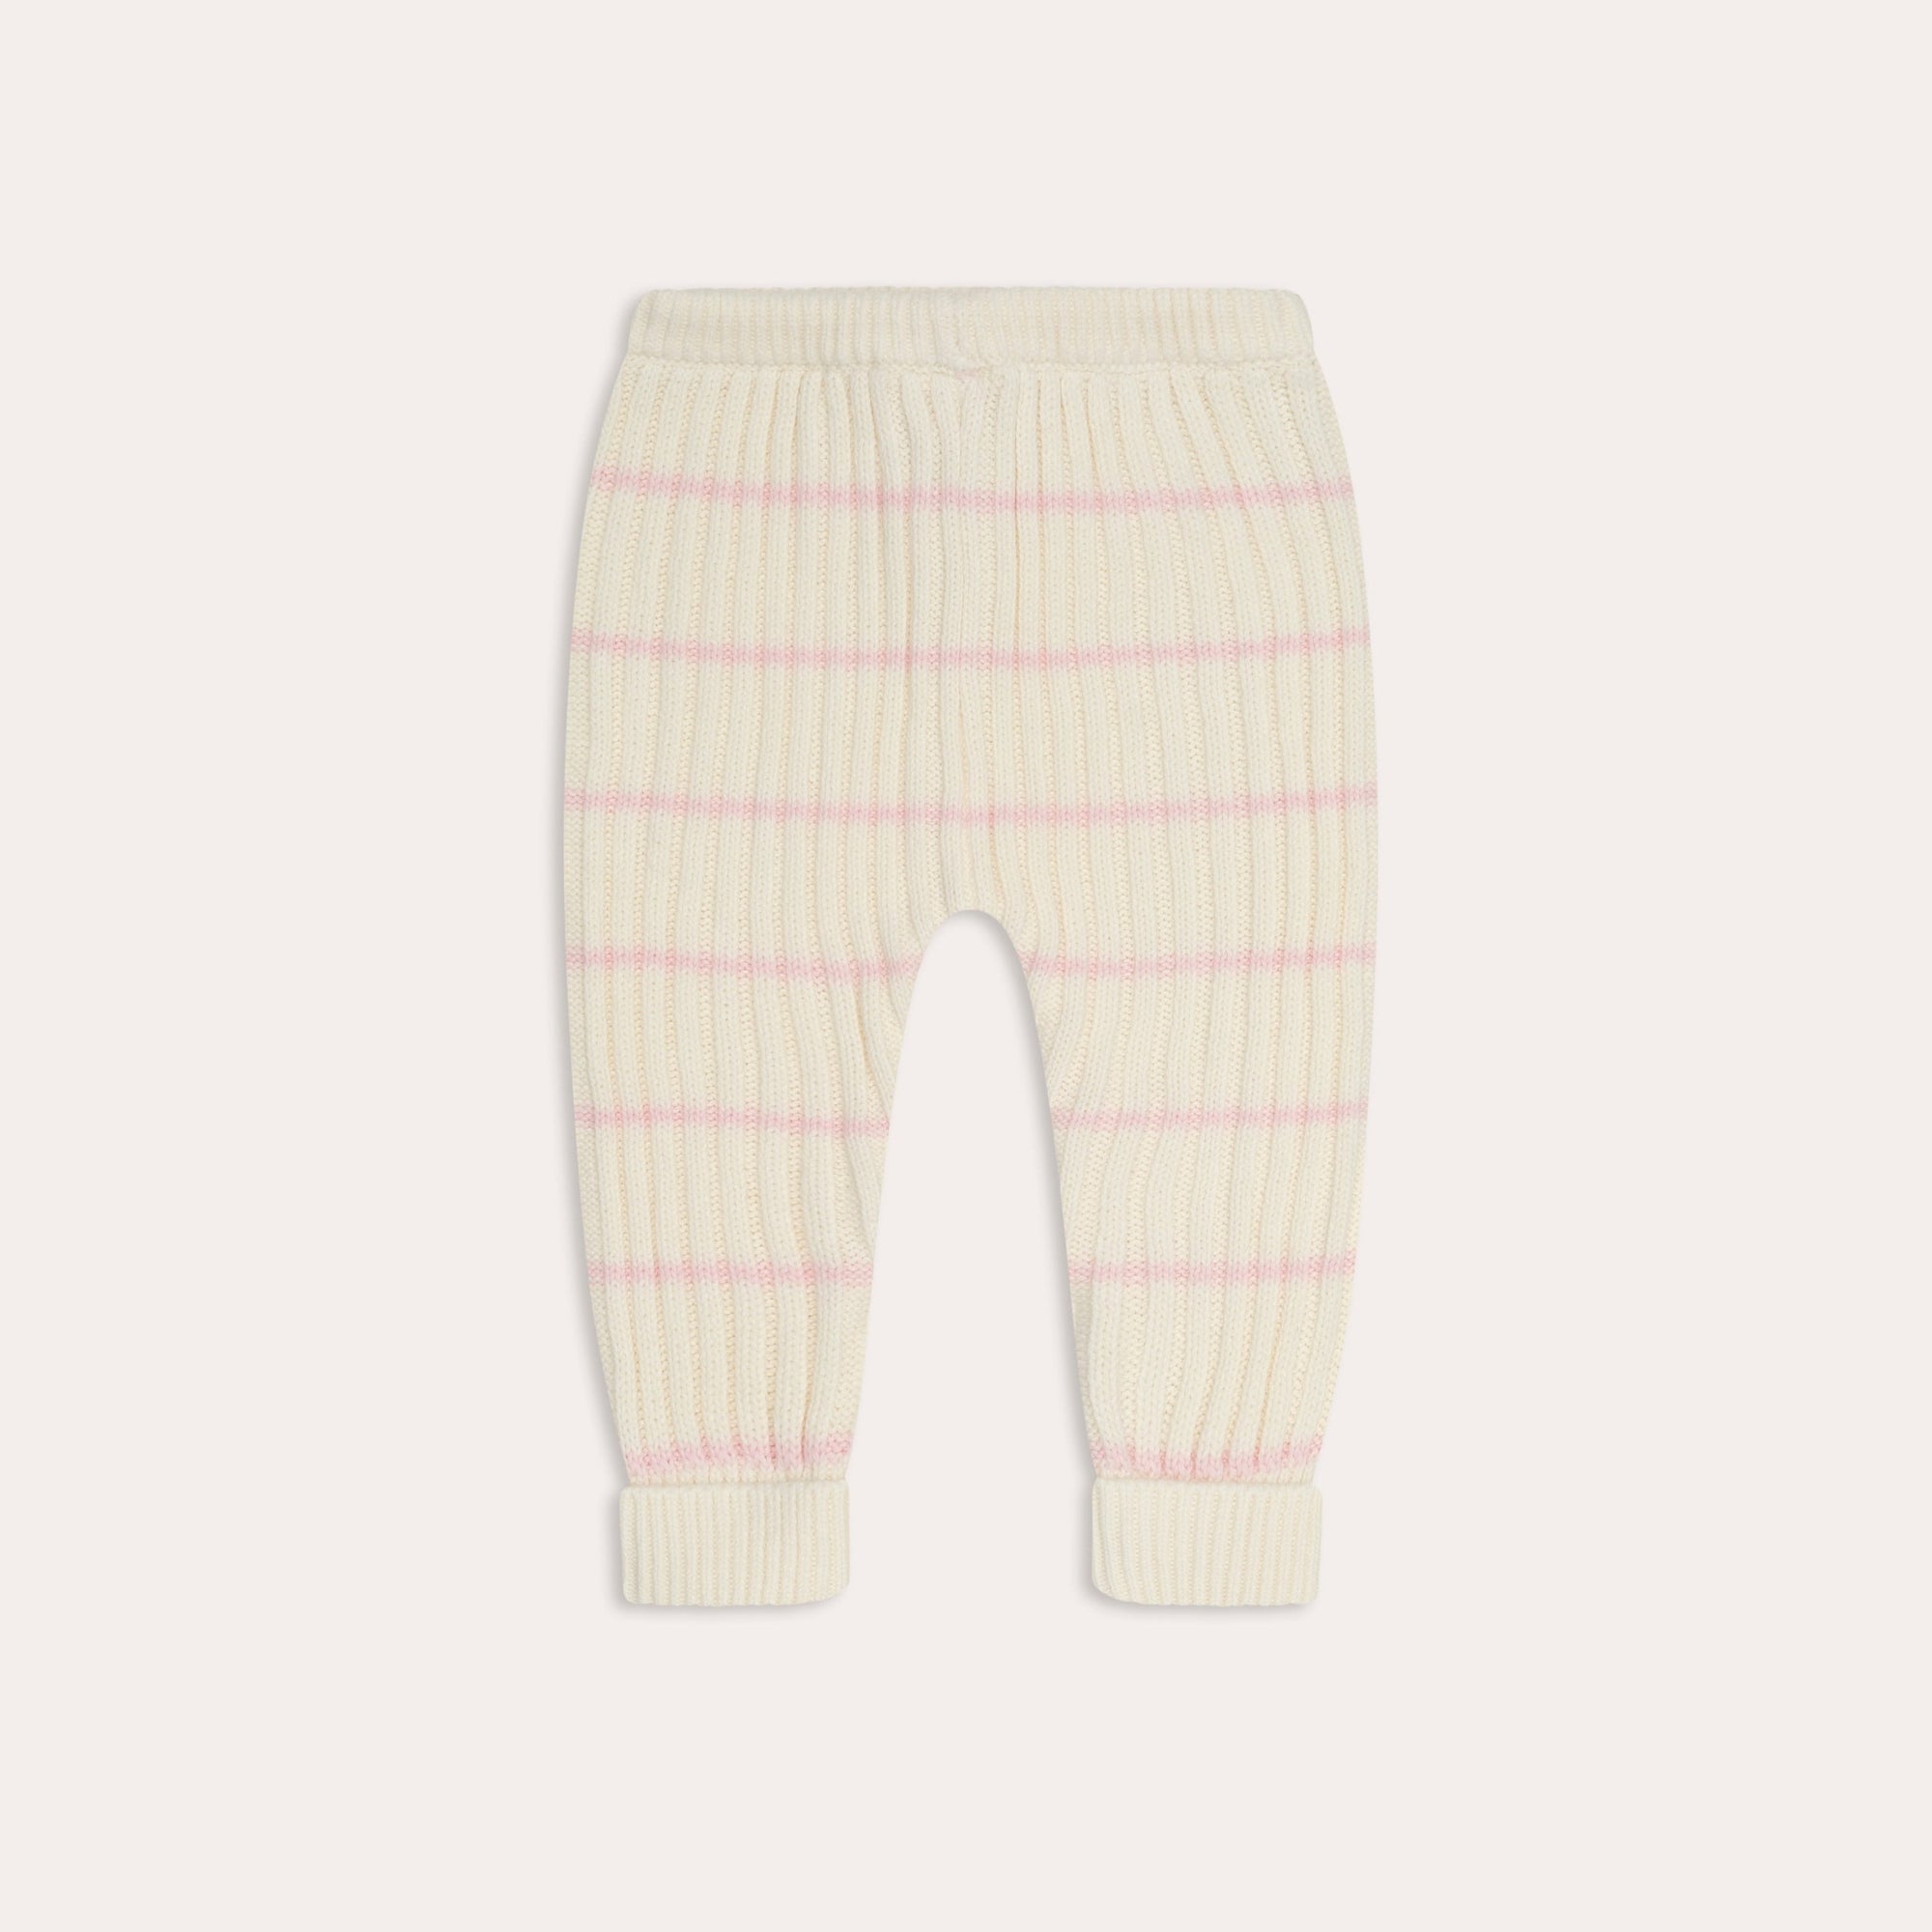 A baby's Illoura the Label white and pink striped illoura knit joey pants made with an elasticated waist for comfort.